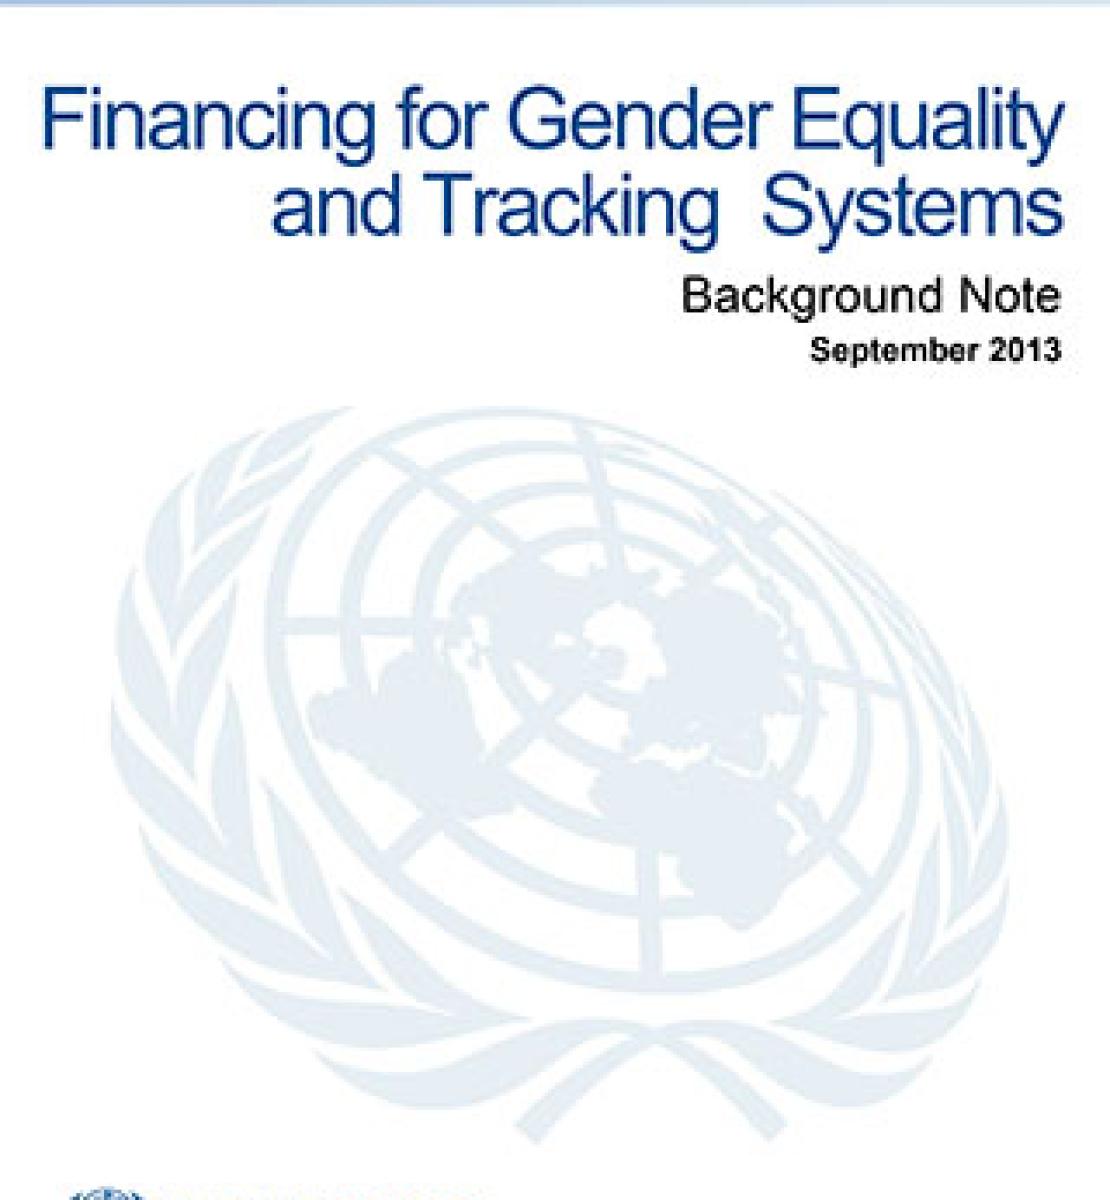 Financing for Gender Equality and Tracking Systems - Background Note